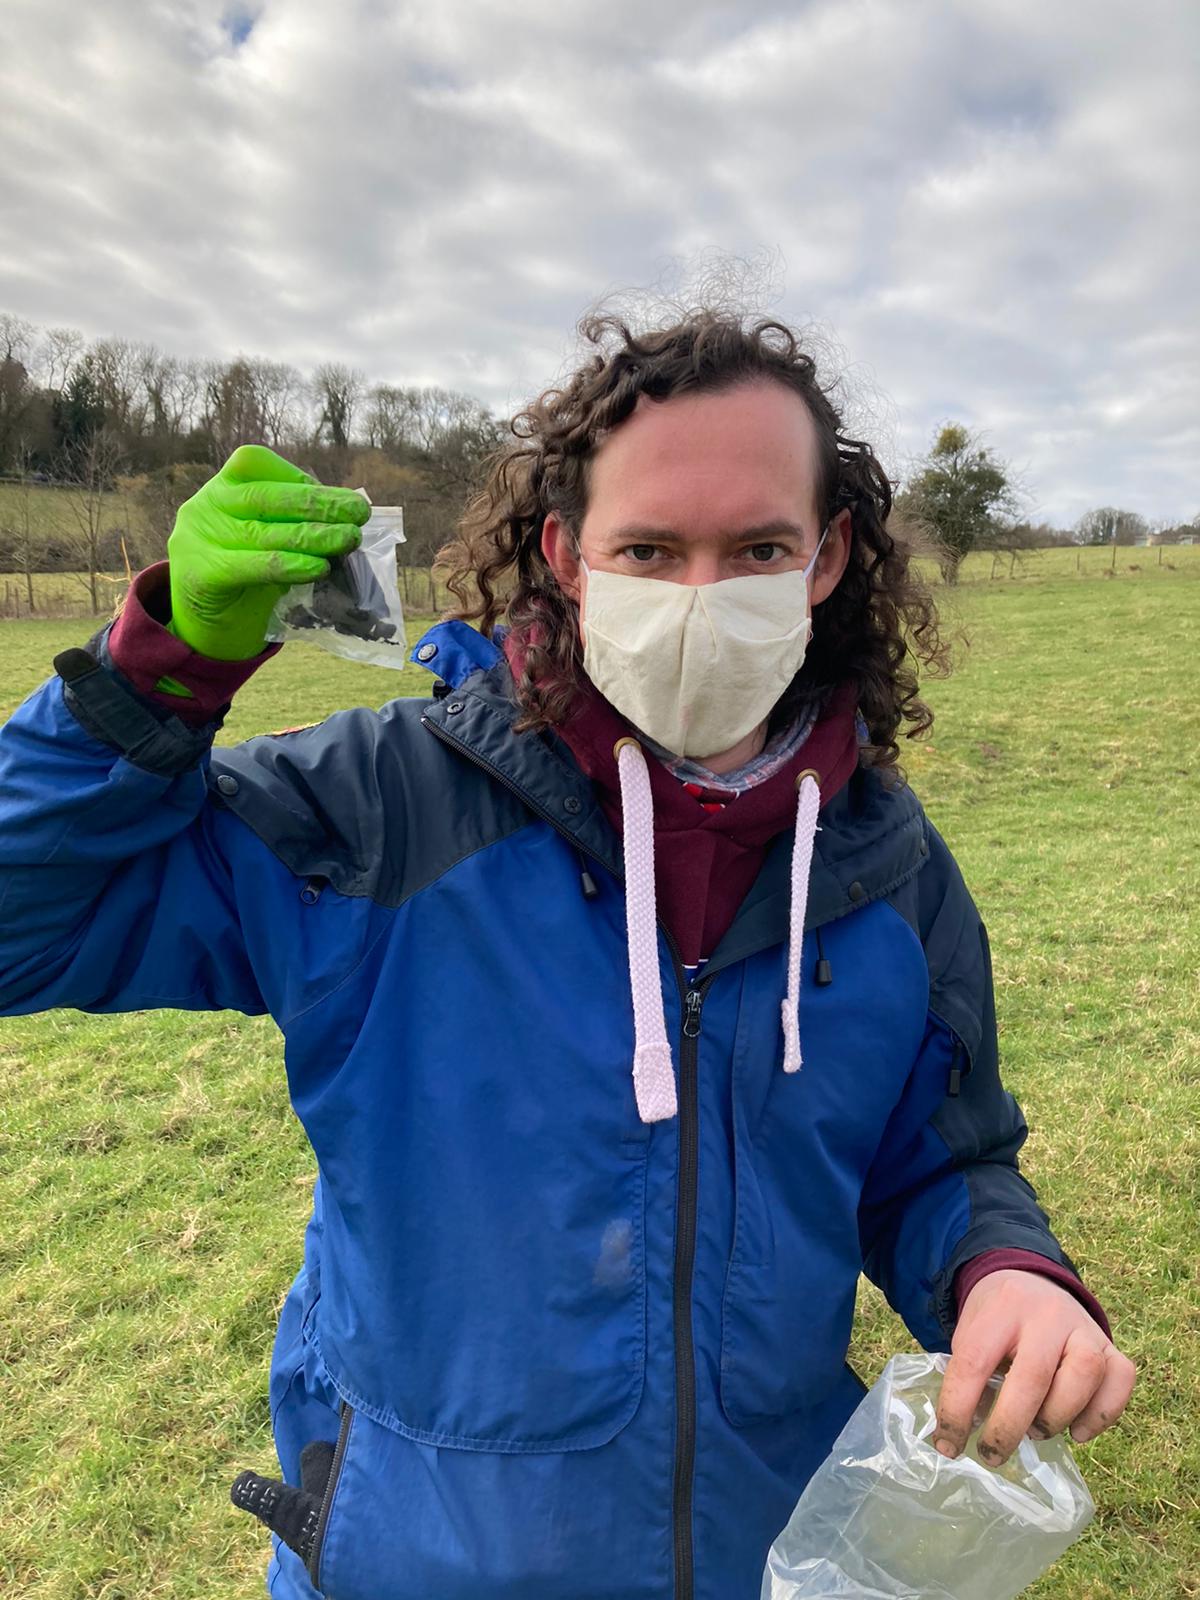 Dr Luke Daly, holding the precious sample, in full covid-ready meteorite searching attire